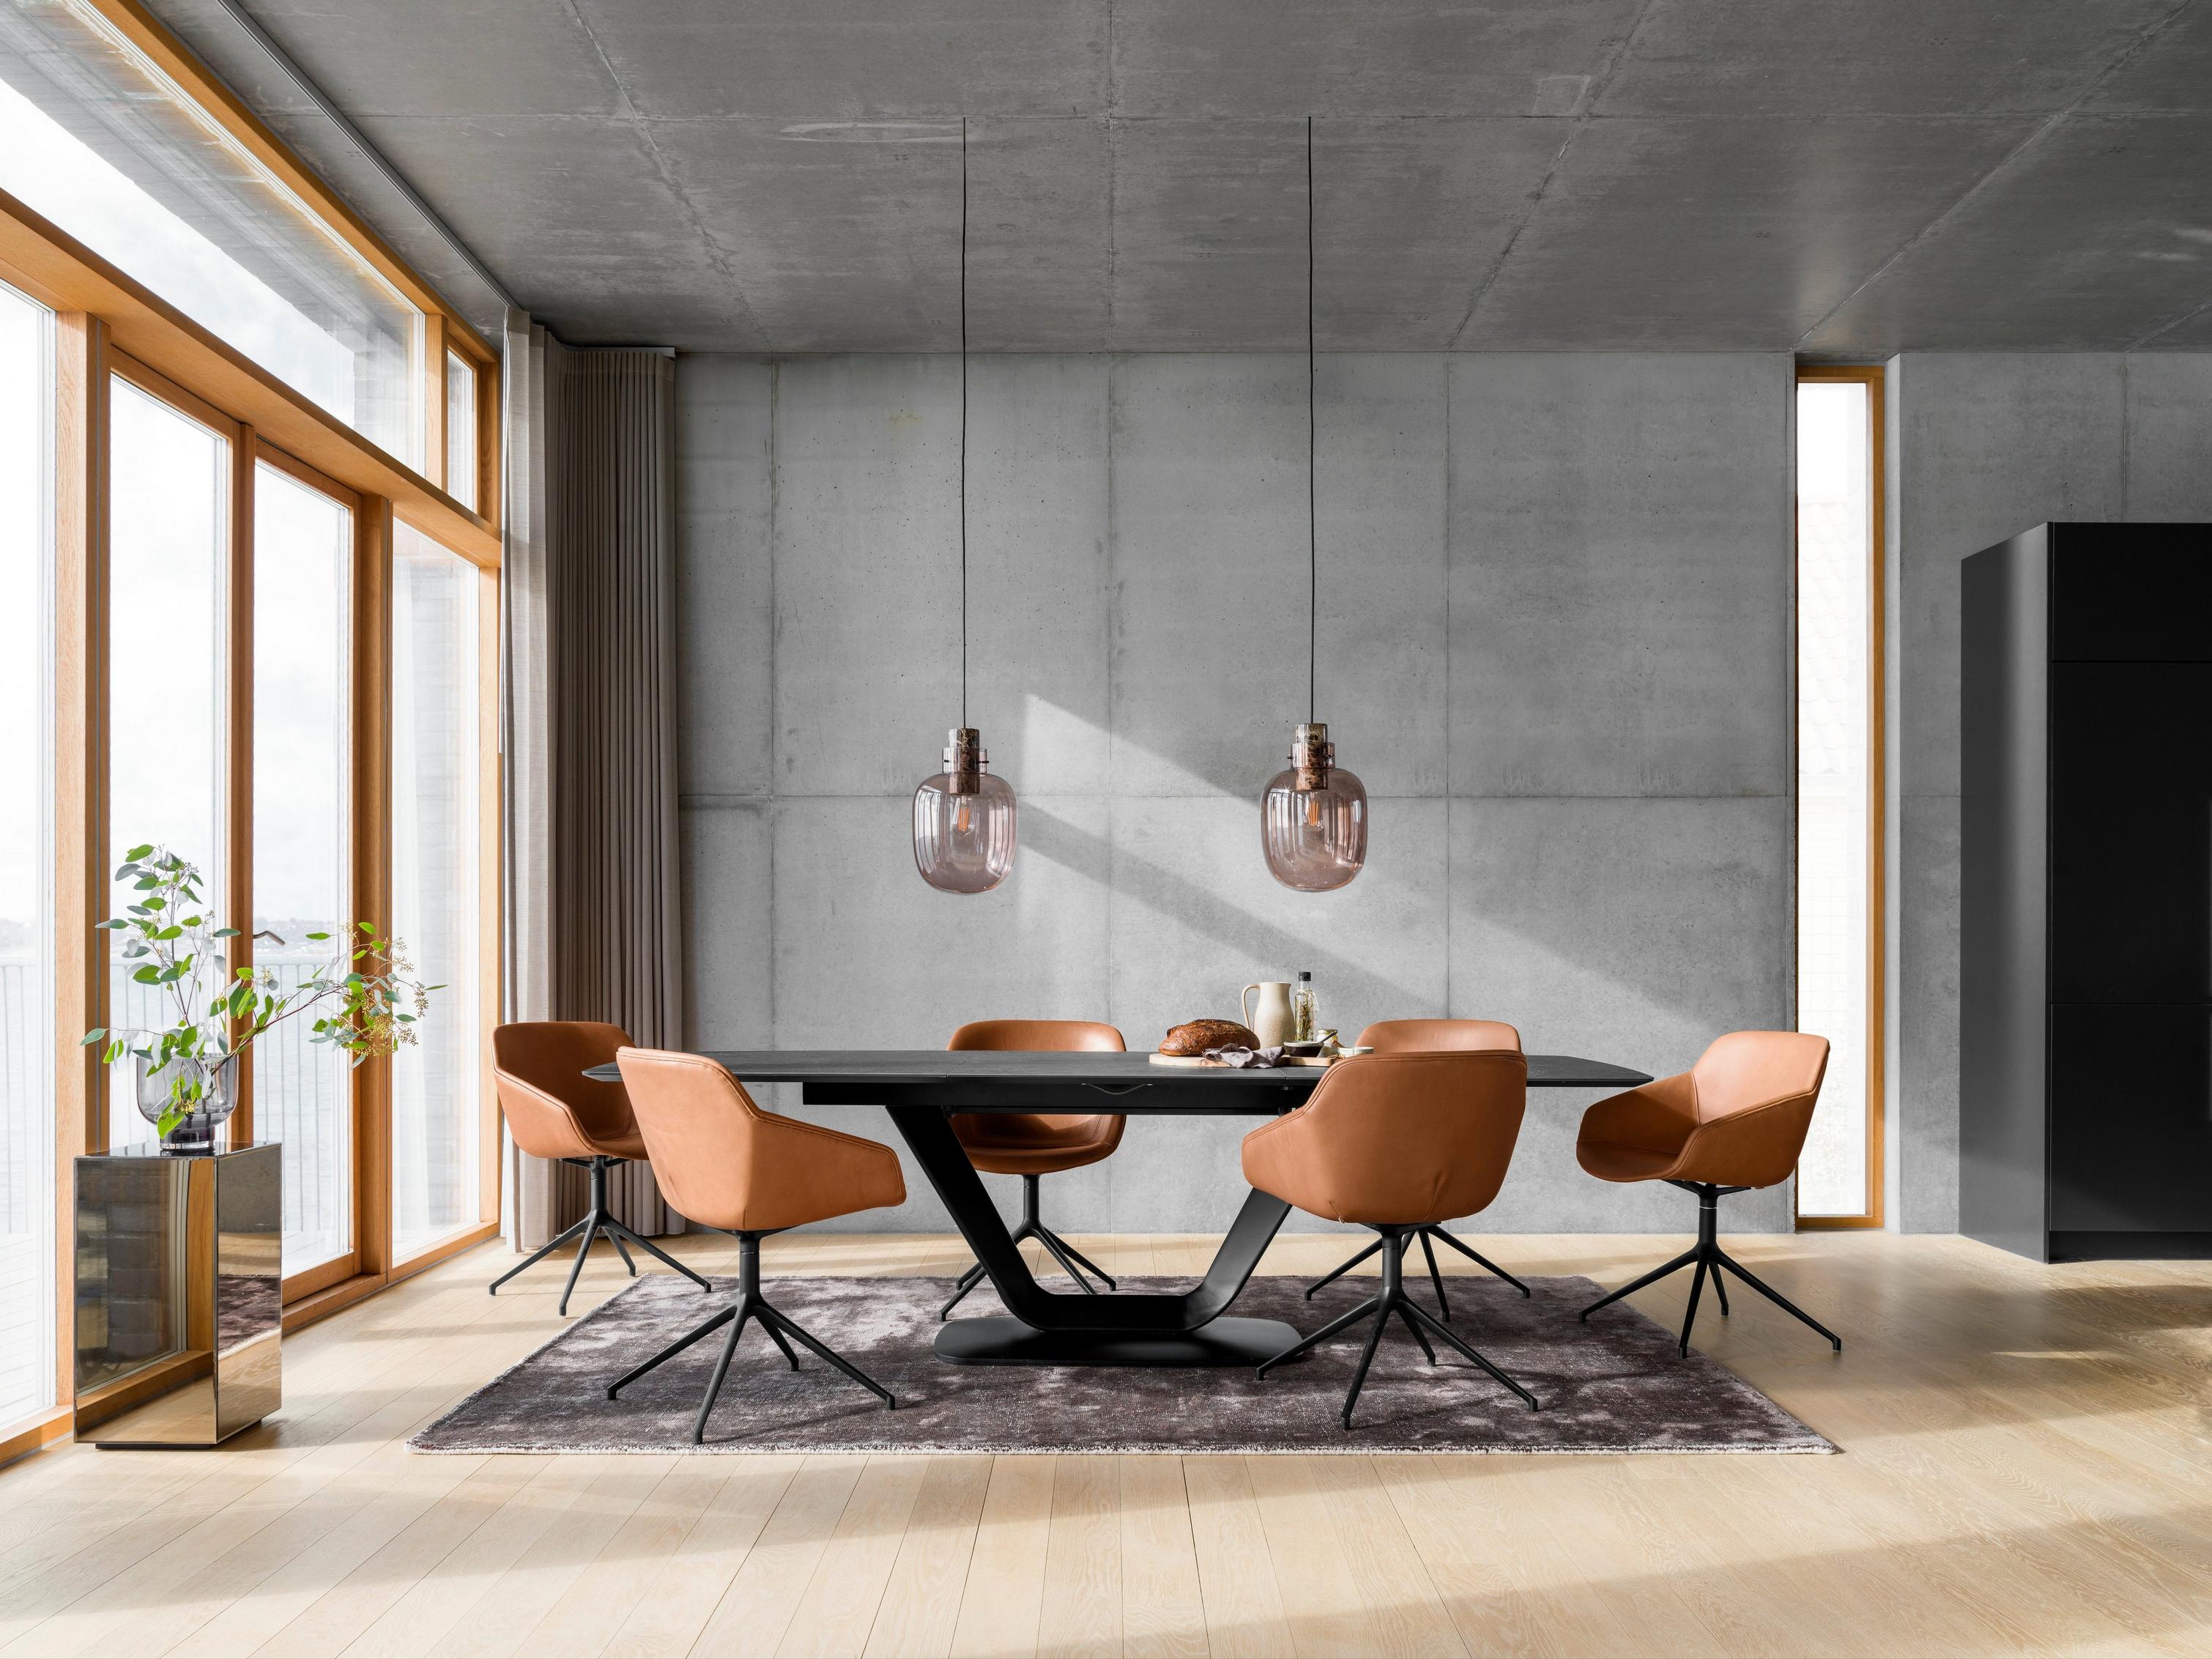 Modern dining room with tan chairs, a black table, pendant lights, and large windows with a city view.